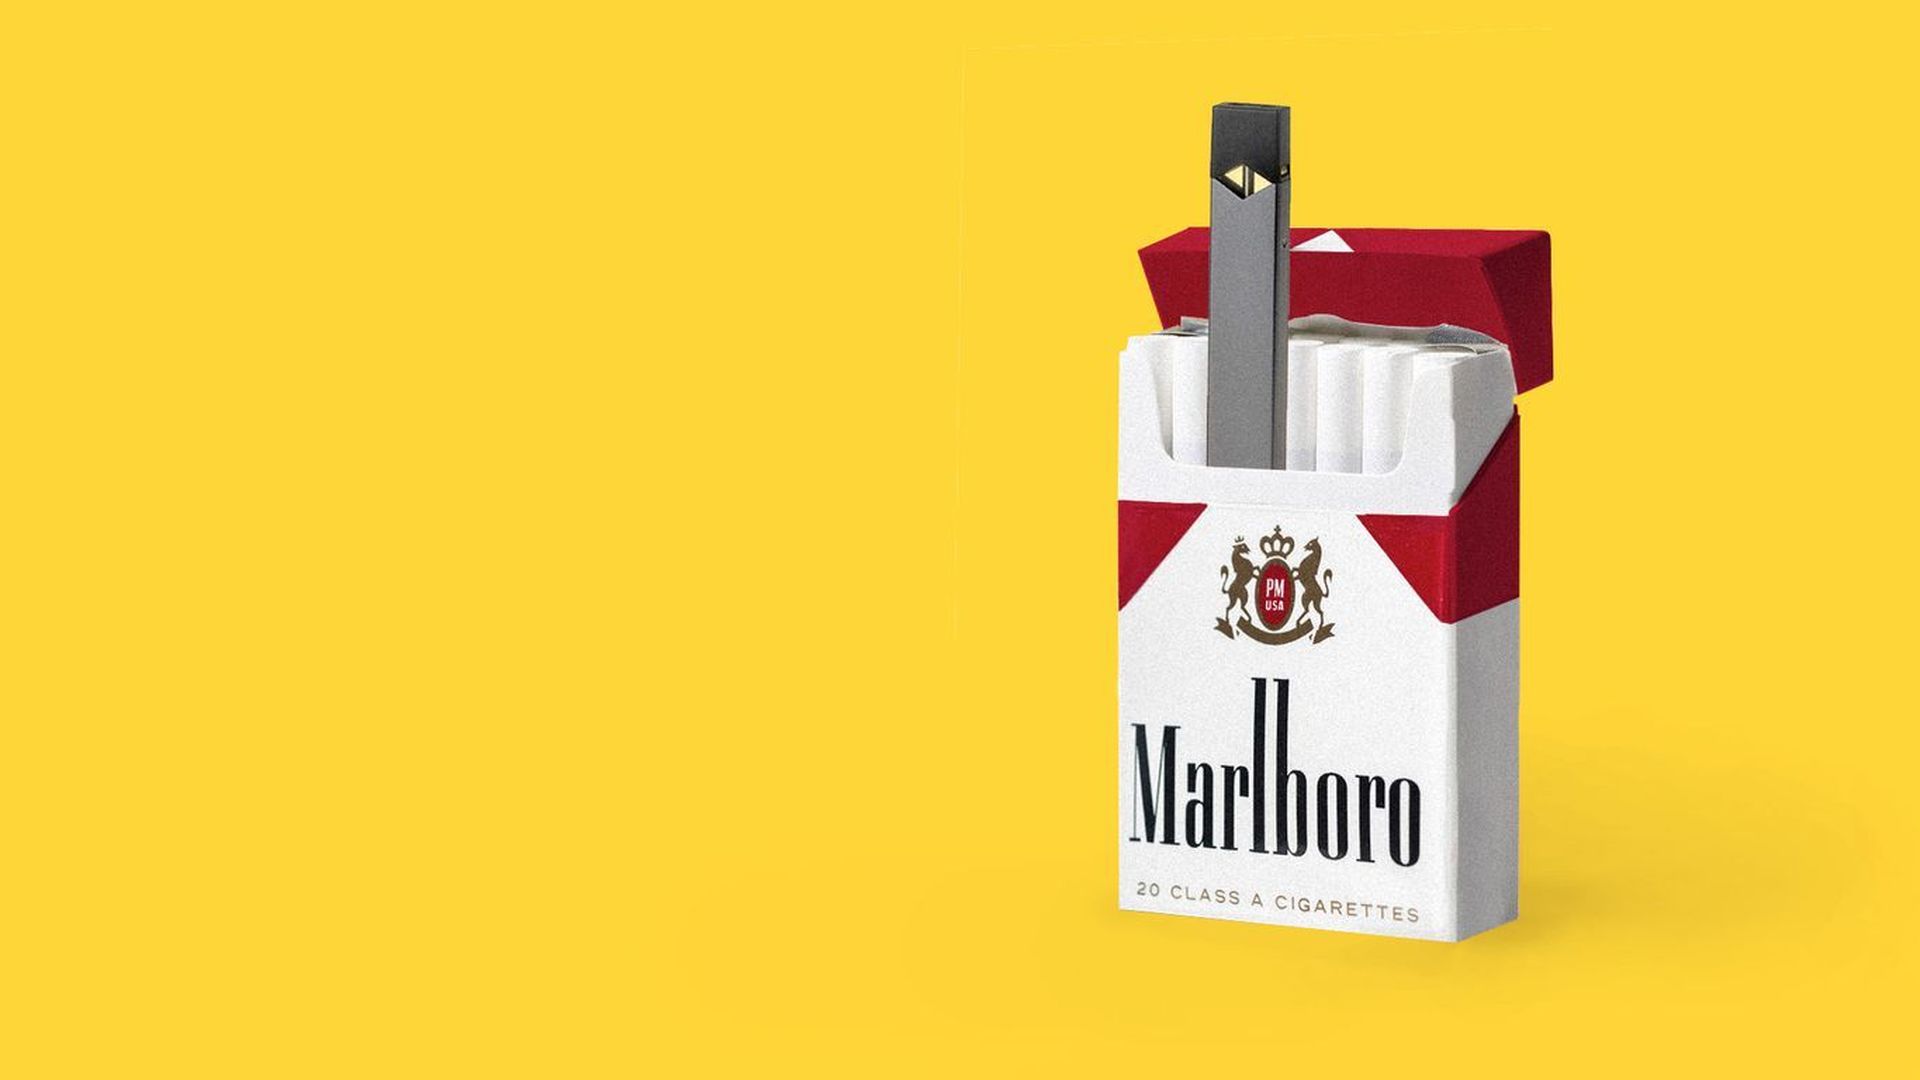 Illustration of a vape pen sticking out of a carton of cigarettes.